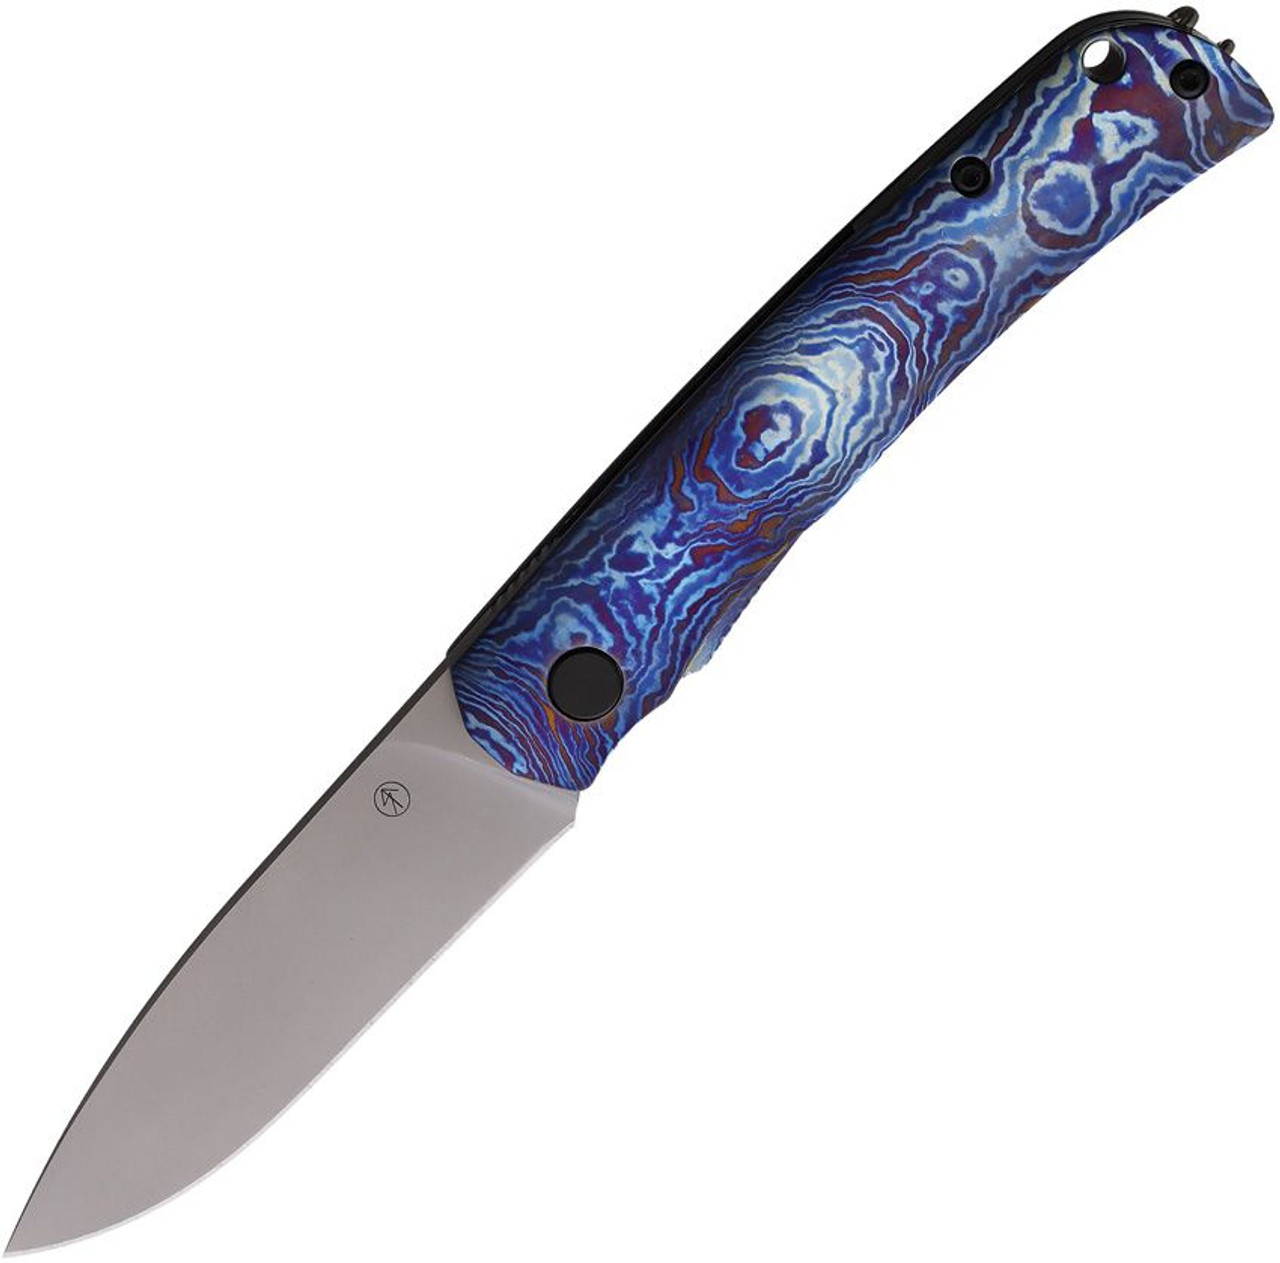 PMP User II Framelock Timascus (PMP052) - 3.1in Satin CPM-S90V Drop Point Plain Blade, Timascus Handle